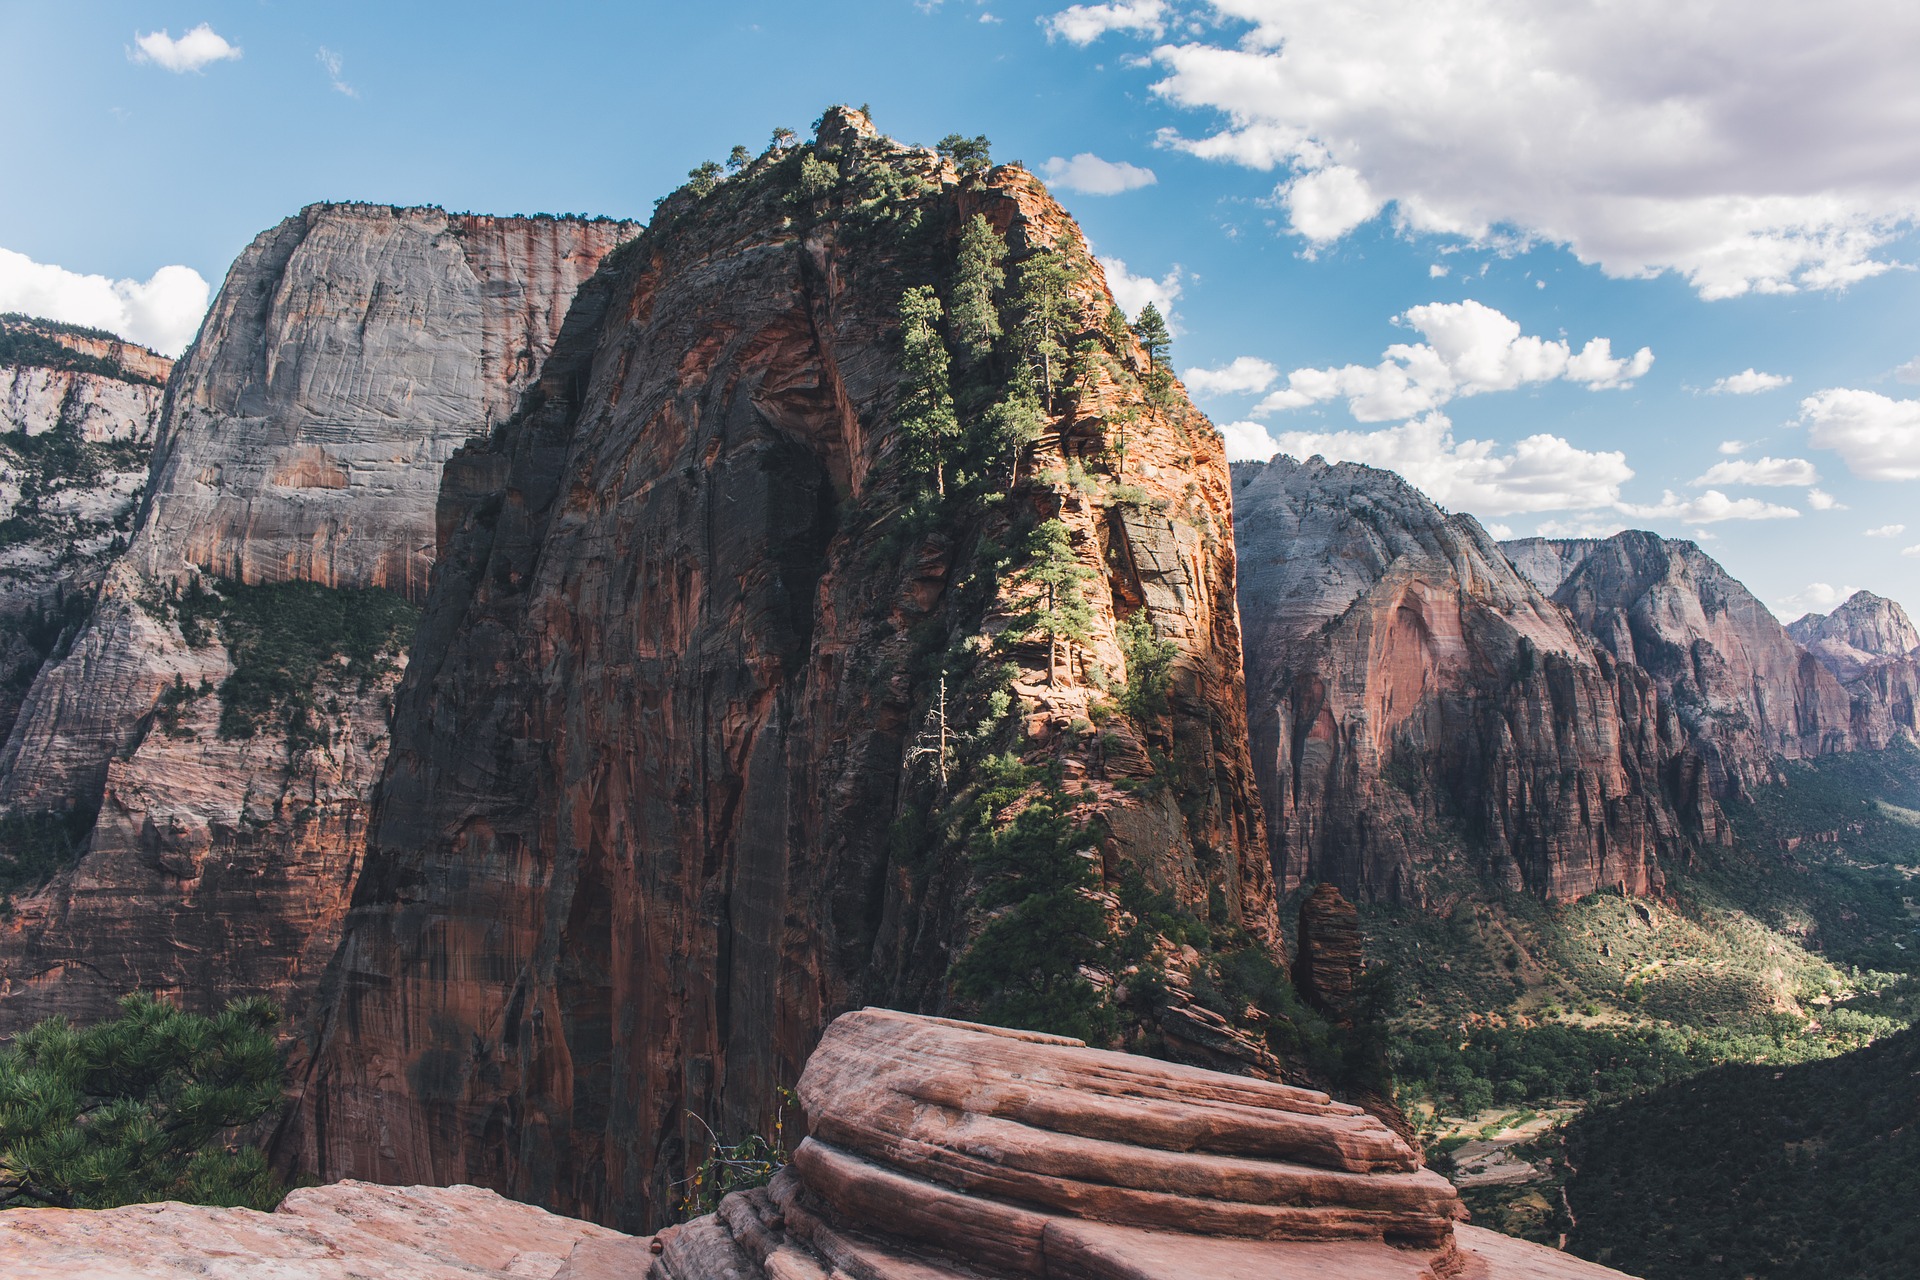 A looming rock formation in Zion.